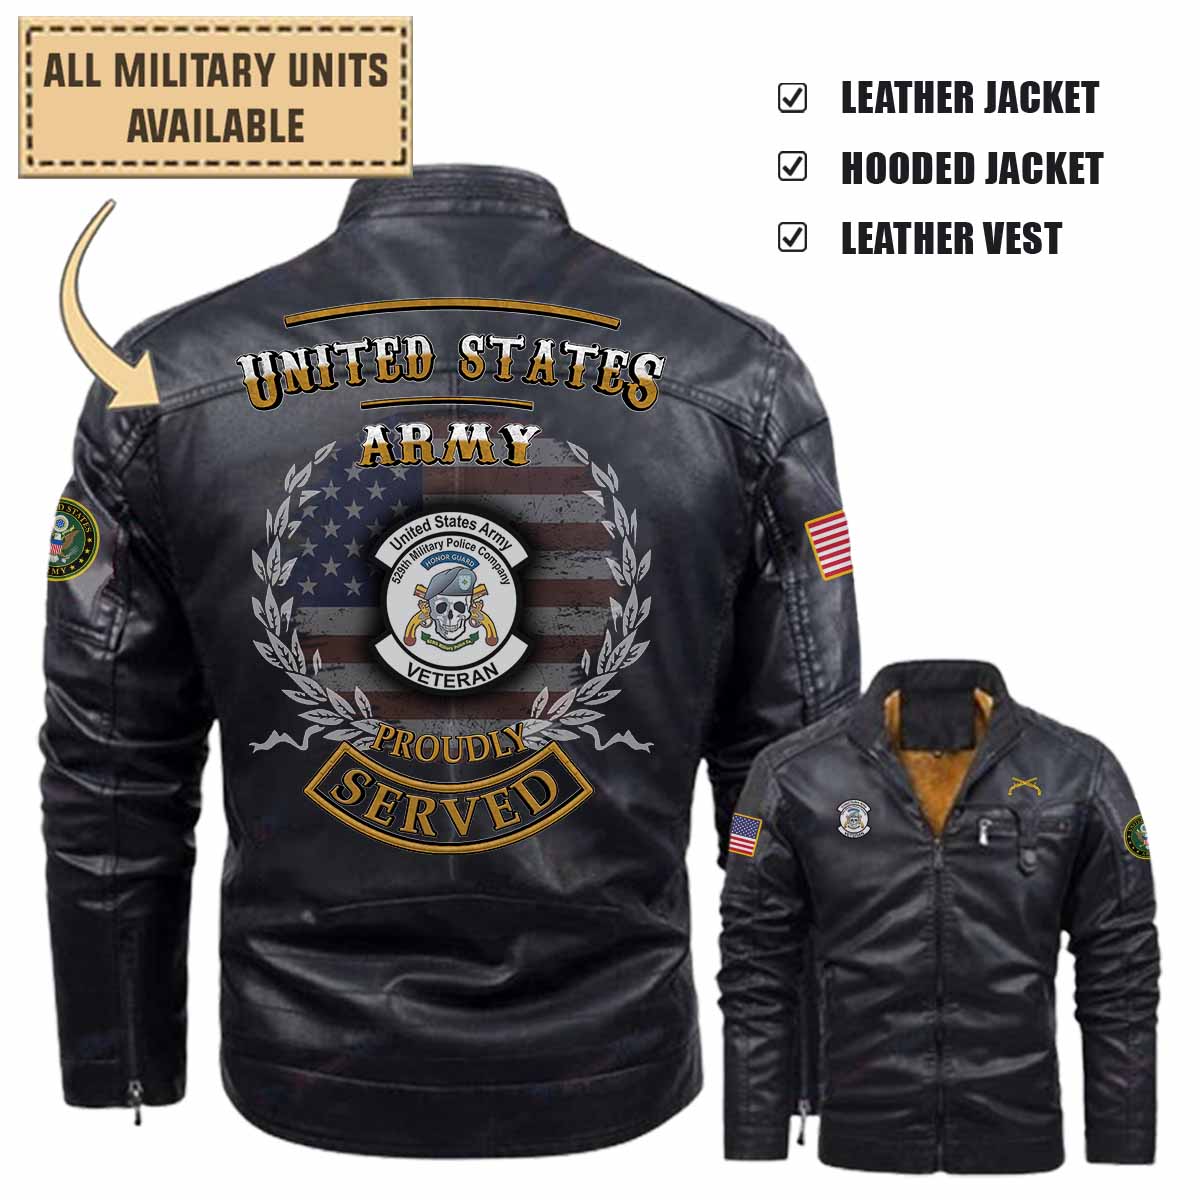 529th MP CO 529th Military Police Company_Military Leather Jacket and Vest